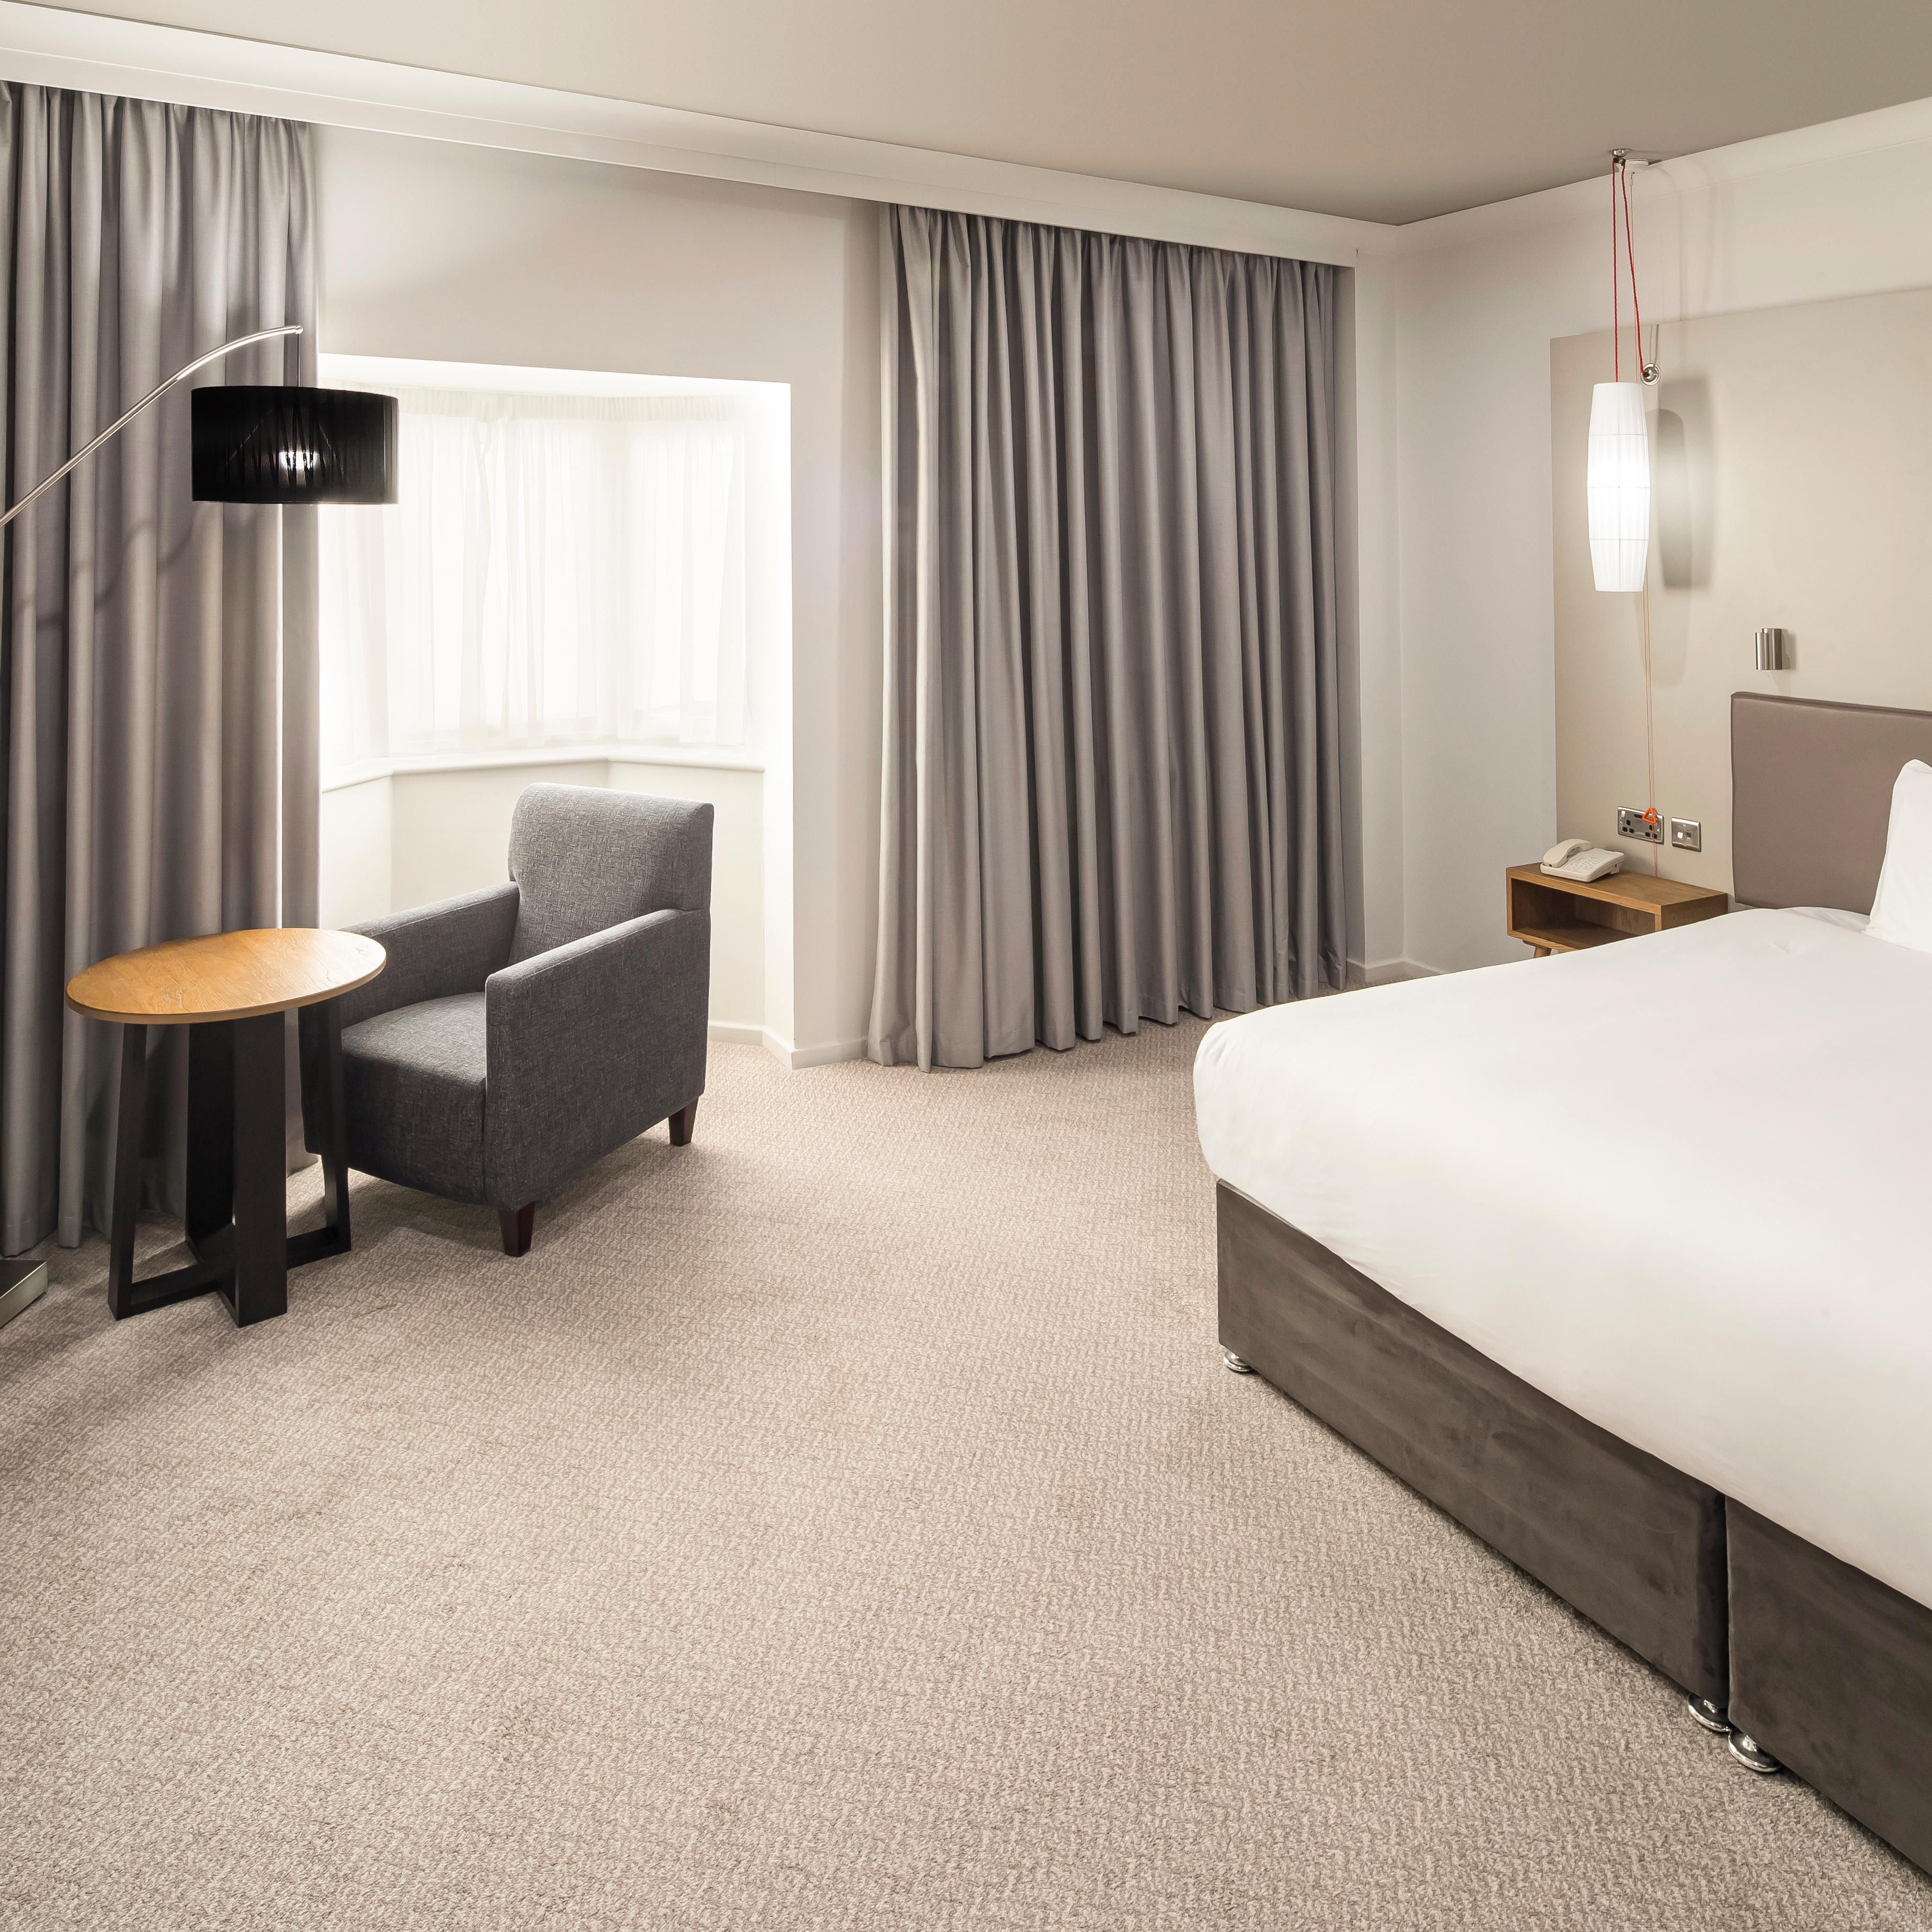 Enjoy your stay in our relaxing and modern King Executive bedroom.